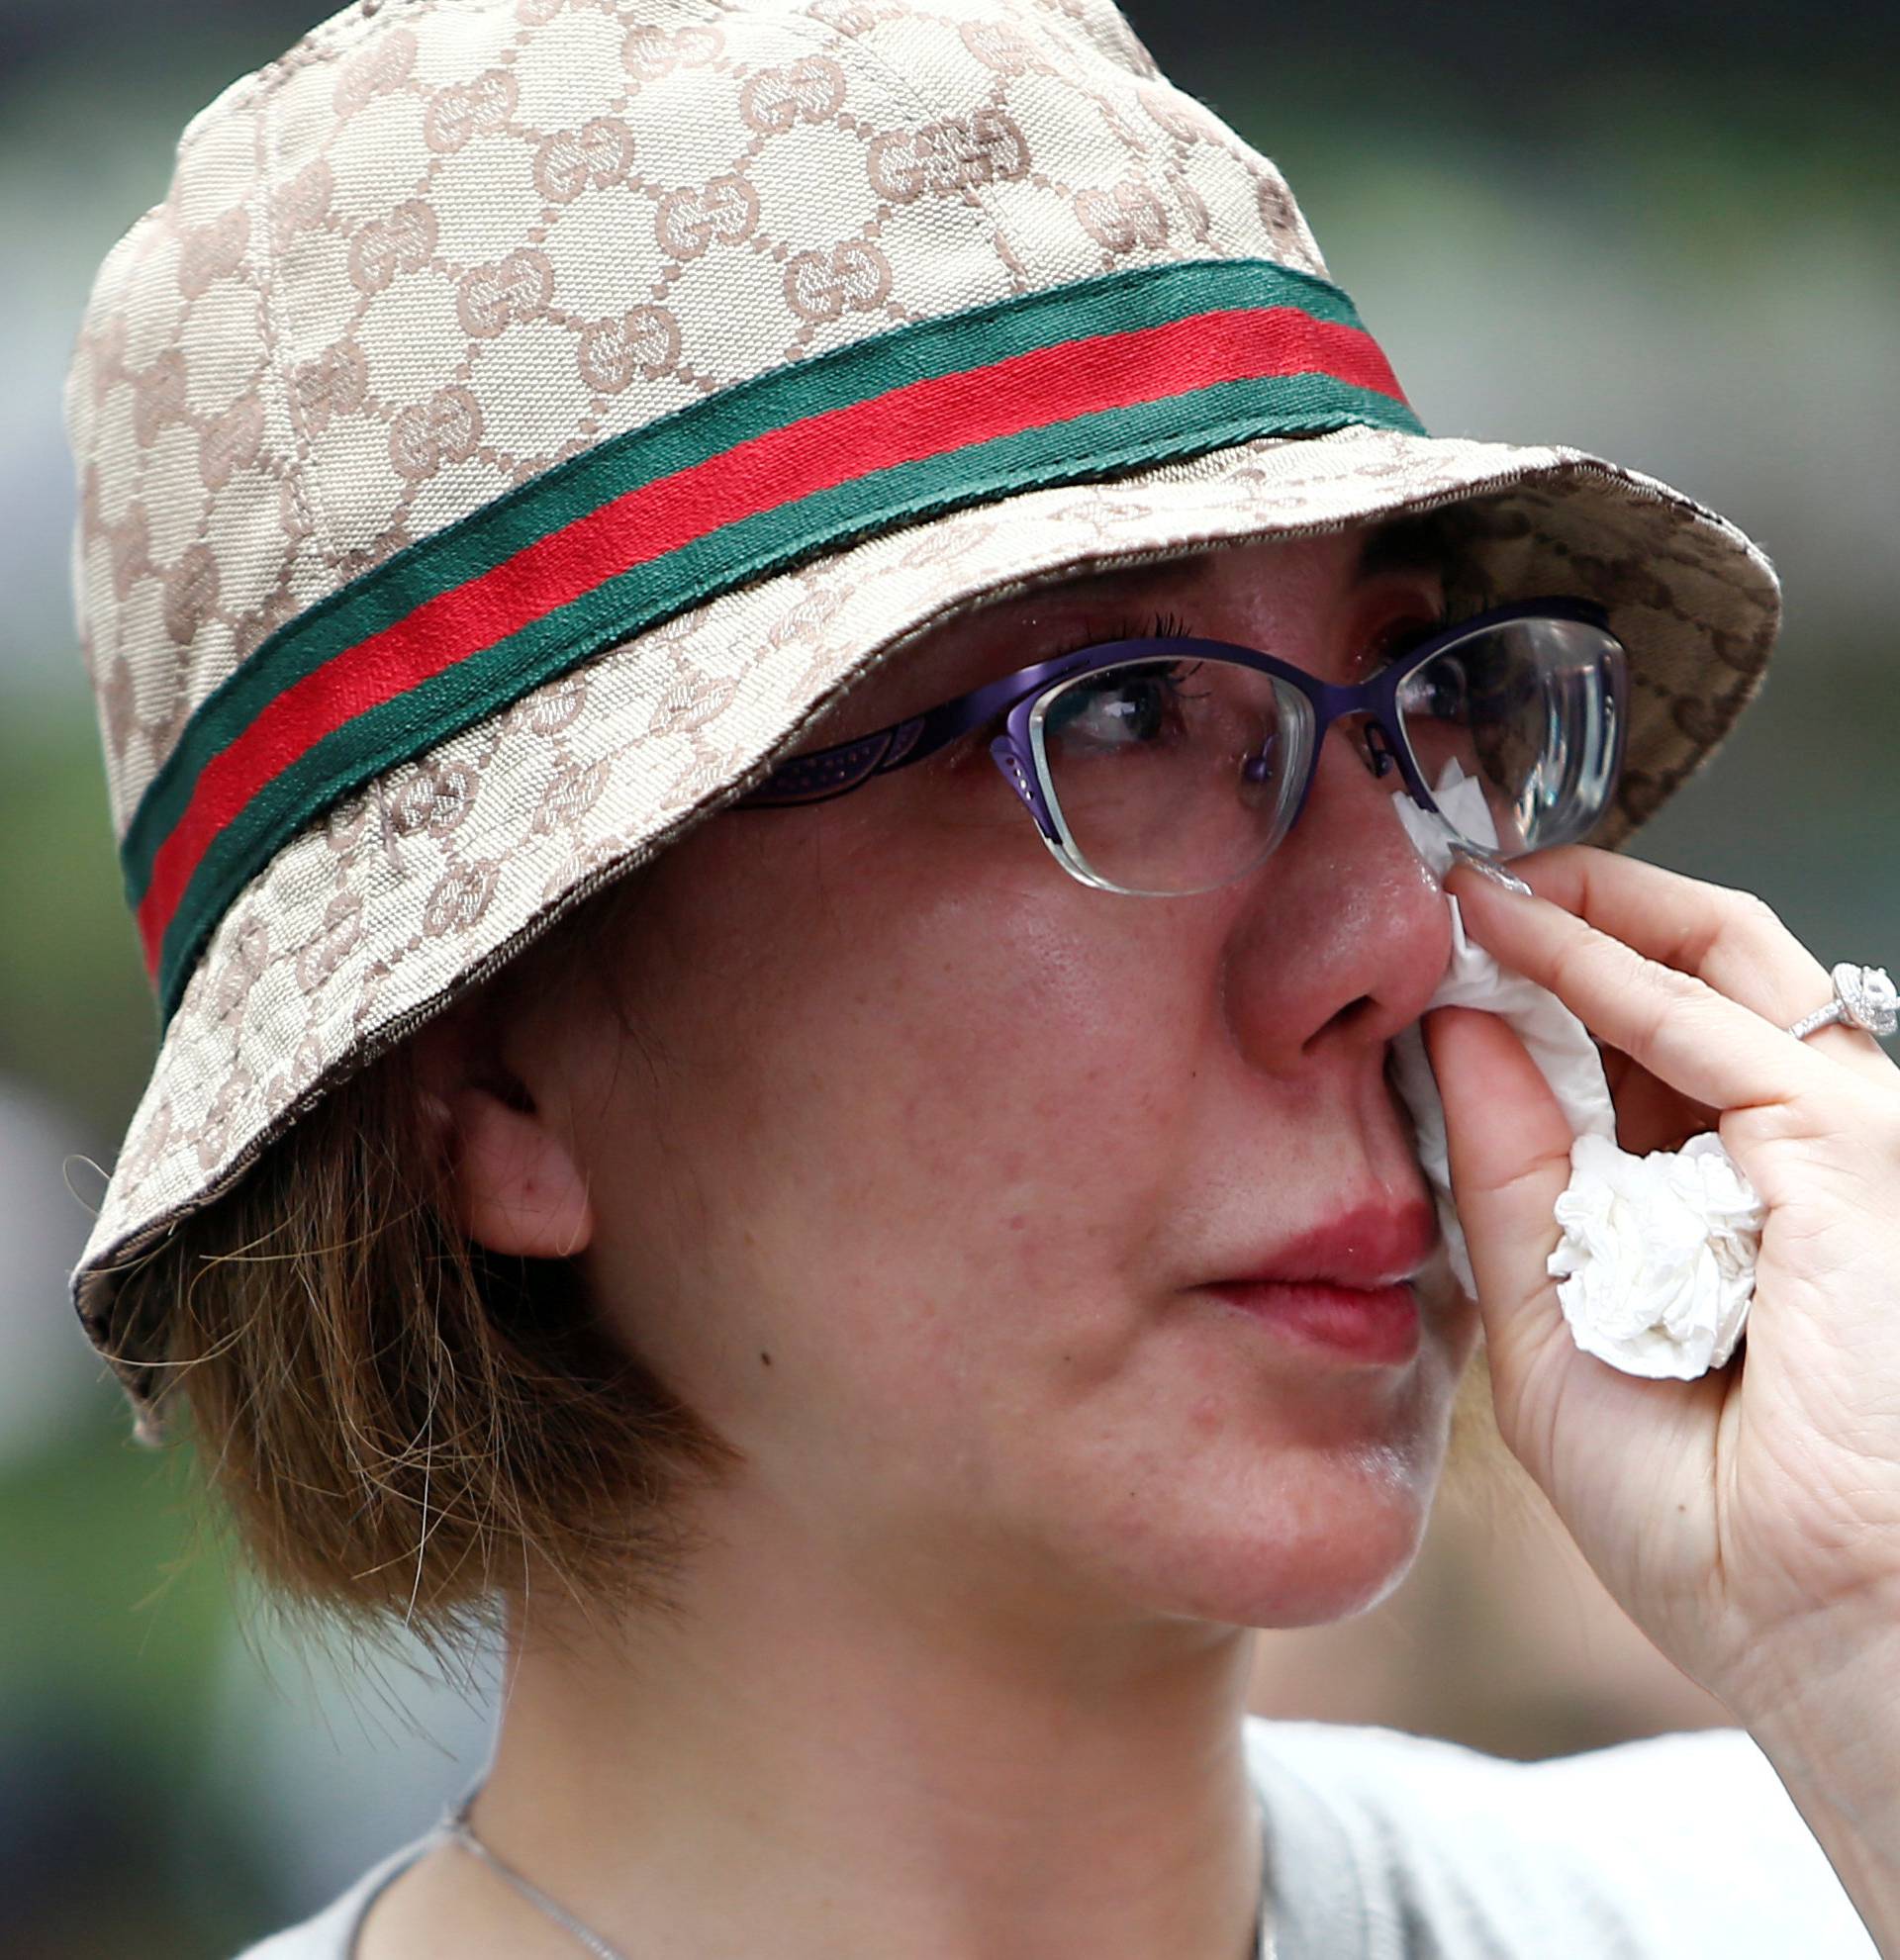 Family member wipes her tears away during fourth annual remembrance event for missing MH370, in Kuala Lumpur